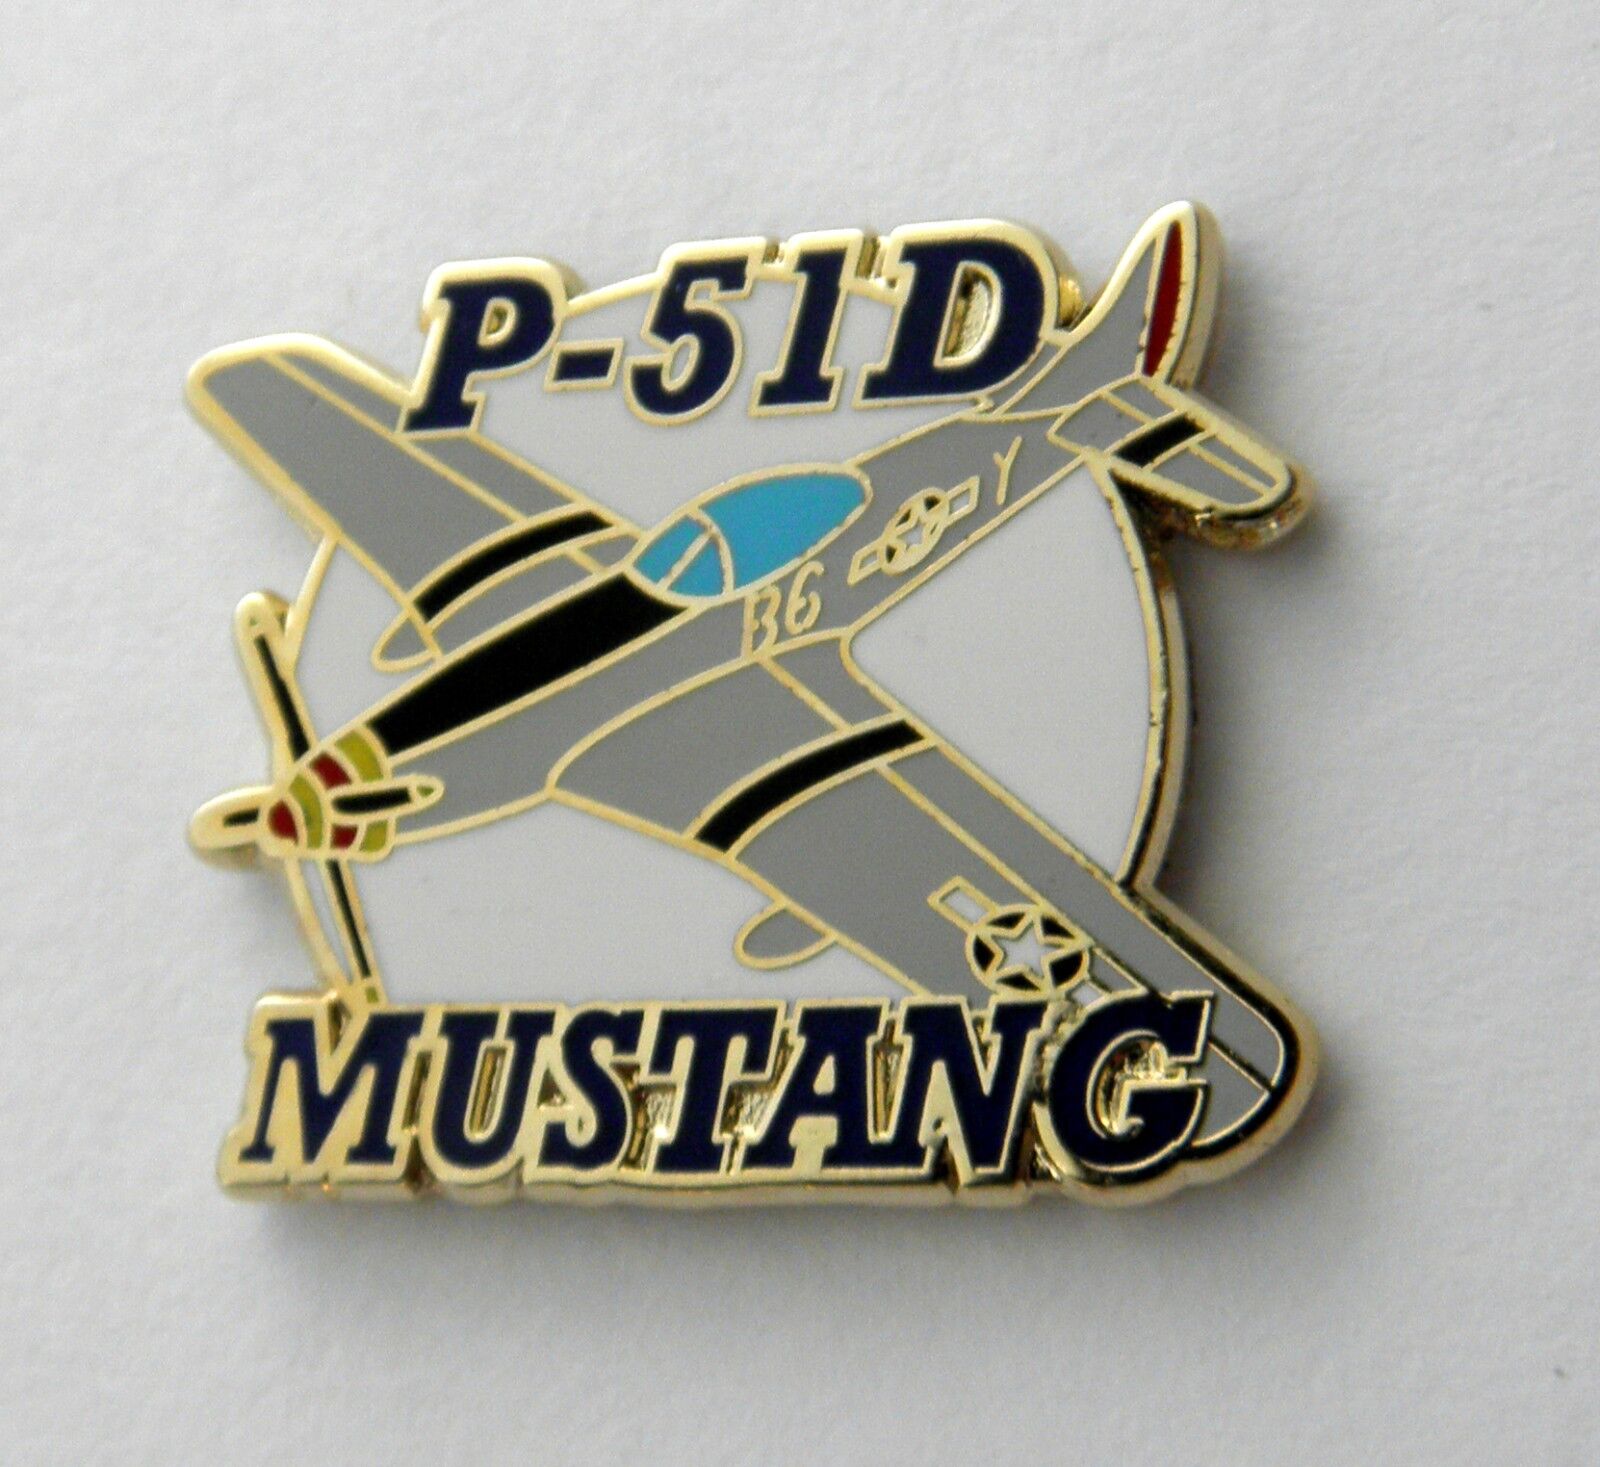 P-51 D USAF MUSTANG FIGHTER BOMBER AIR FORCE AIRCRAFT LAPEL PIN BADGE 1.5 INCHES